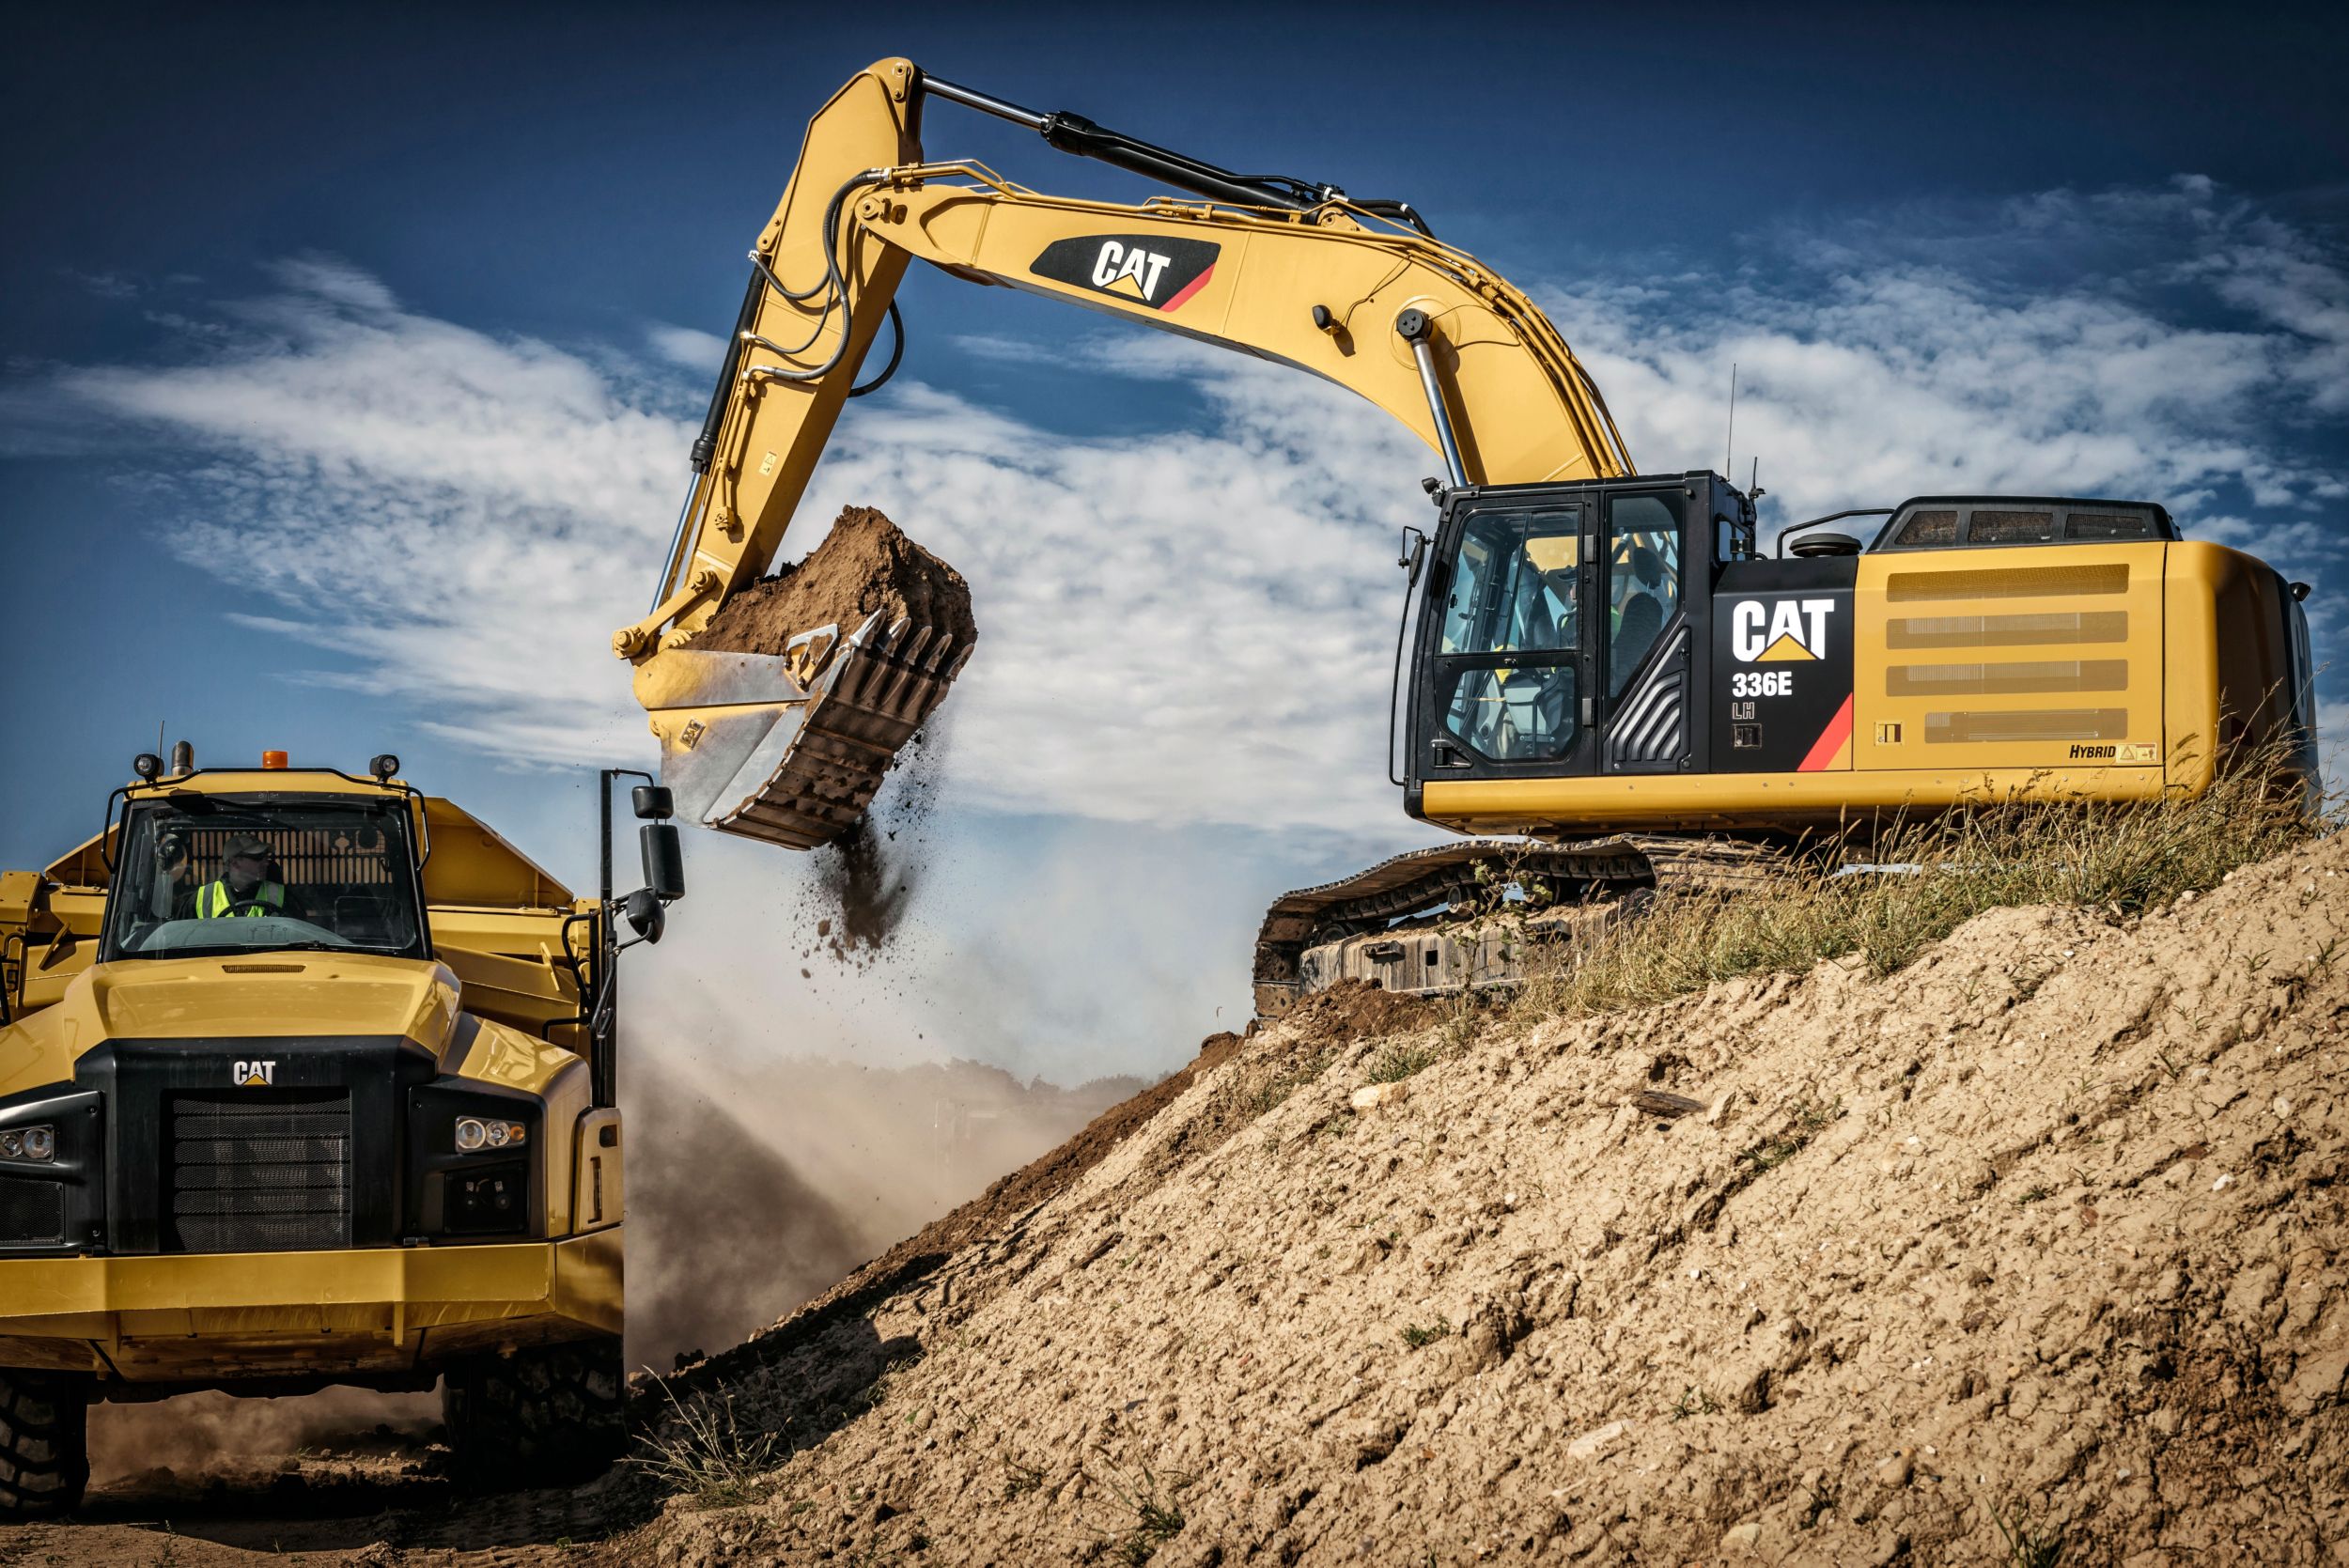 Caterpillar Says Construction Equipment Remains in Demand